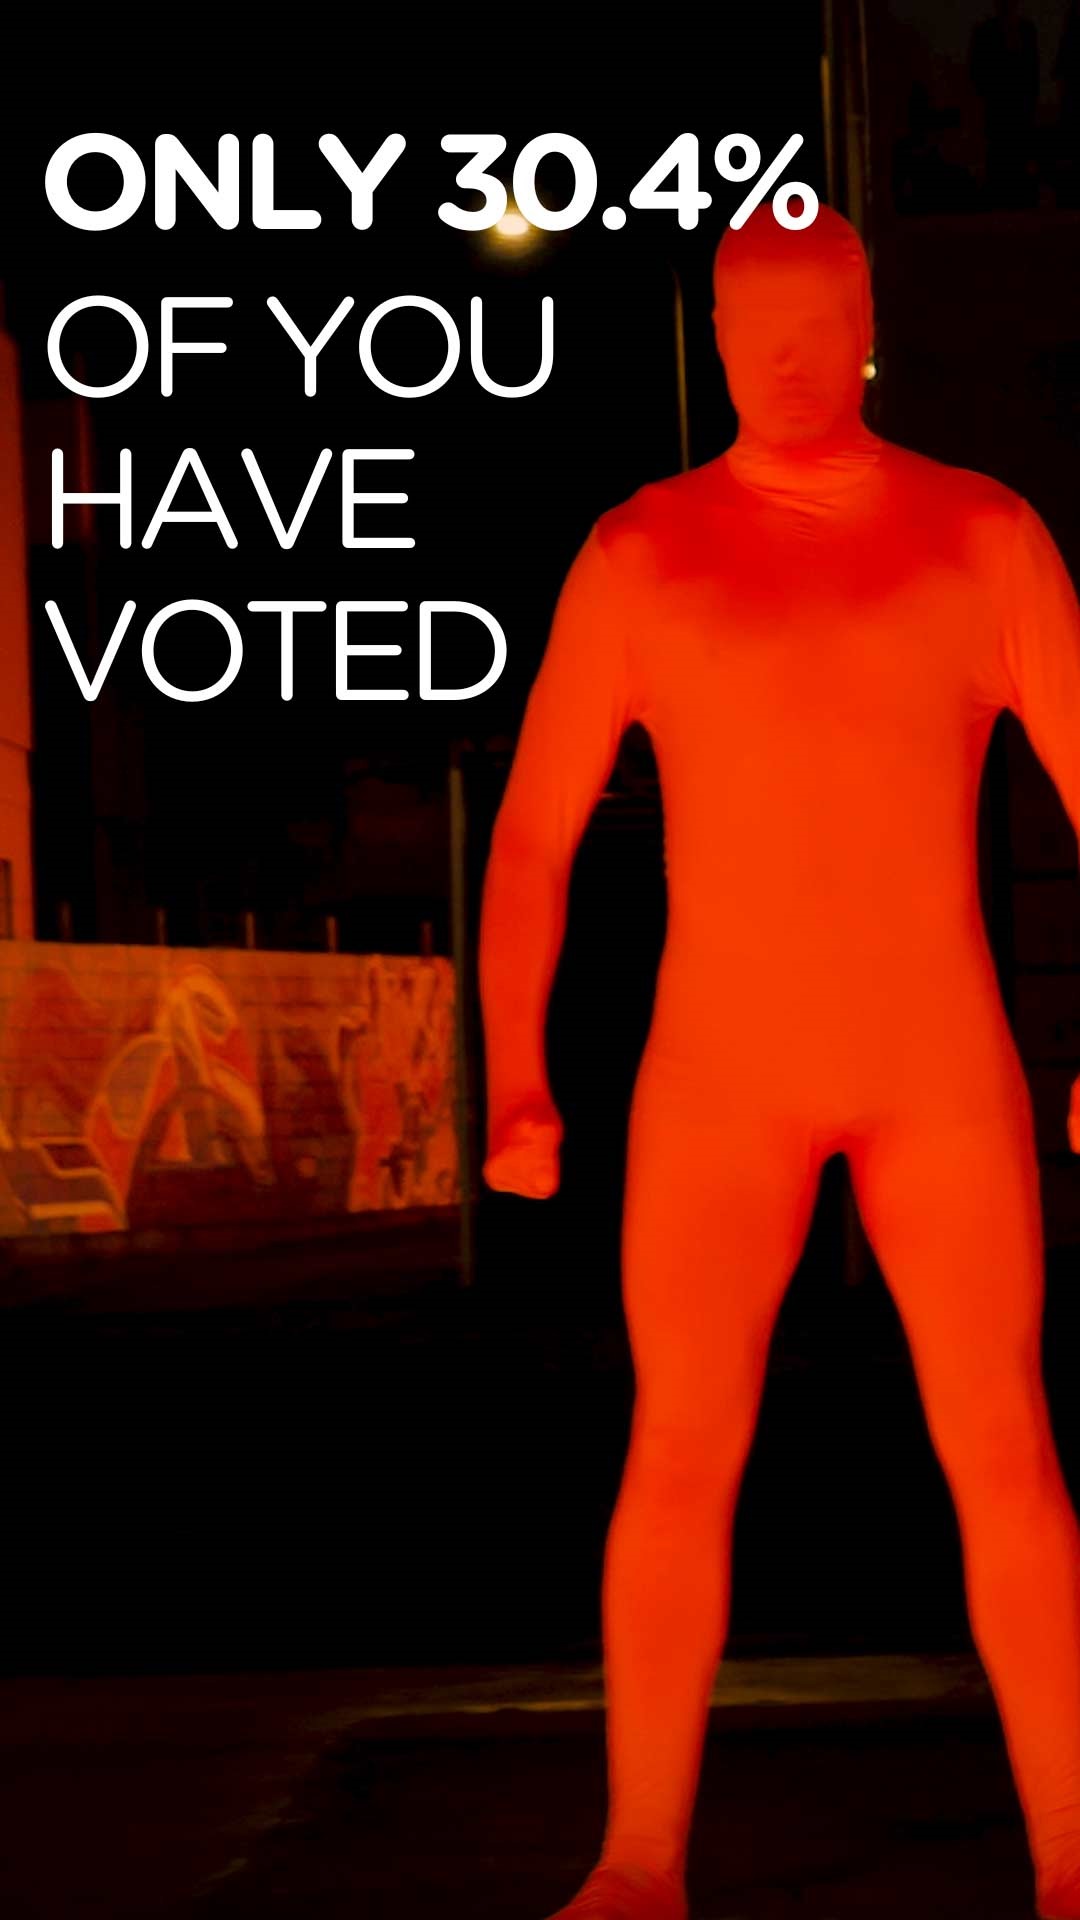 Orange man overlaid with text showing what percentage of people have voted.